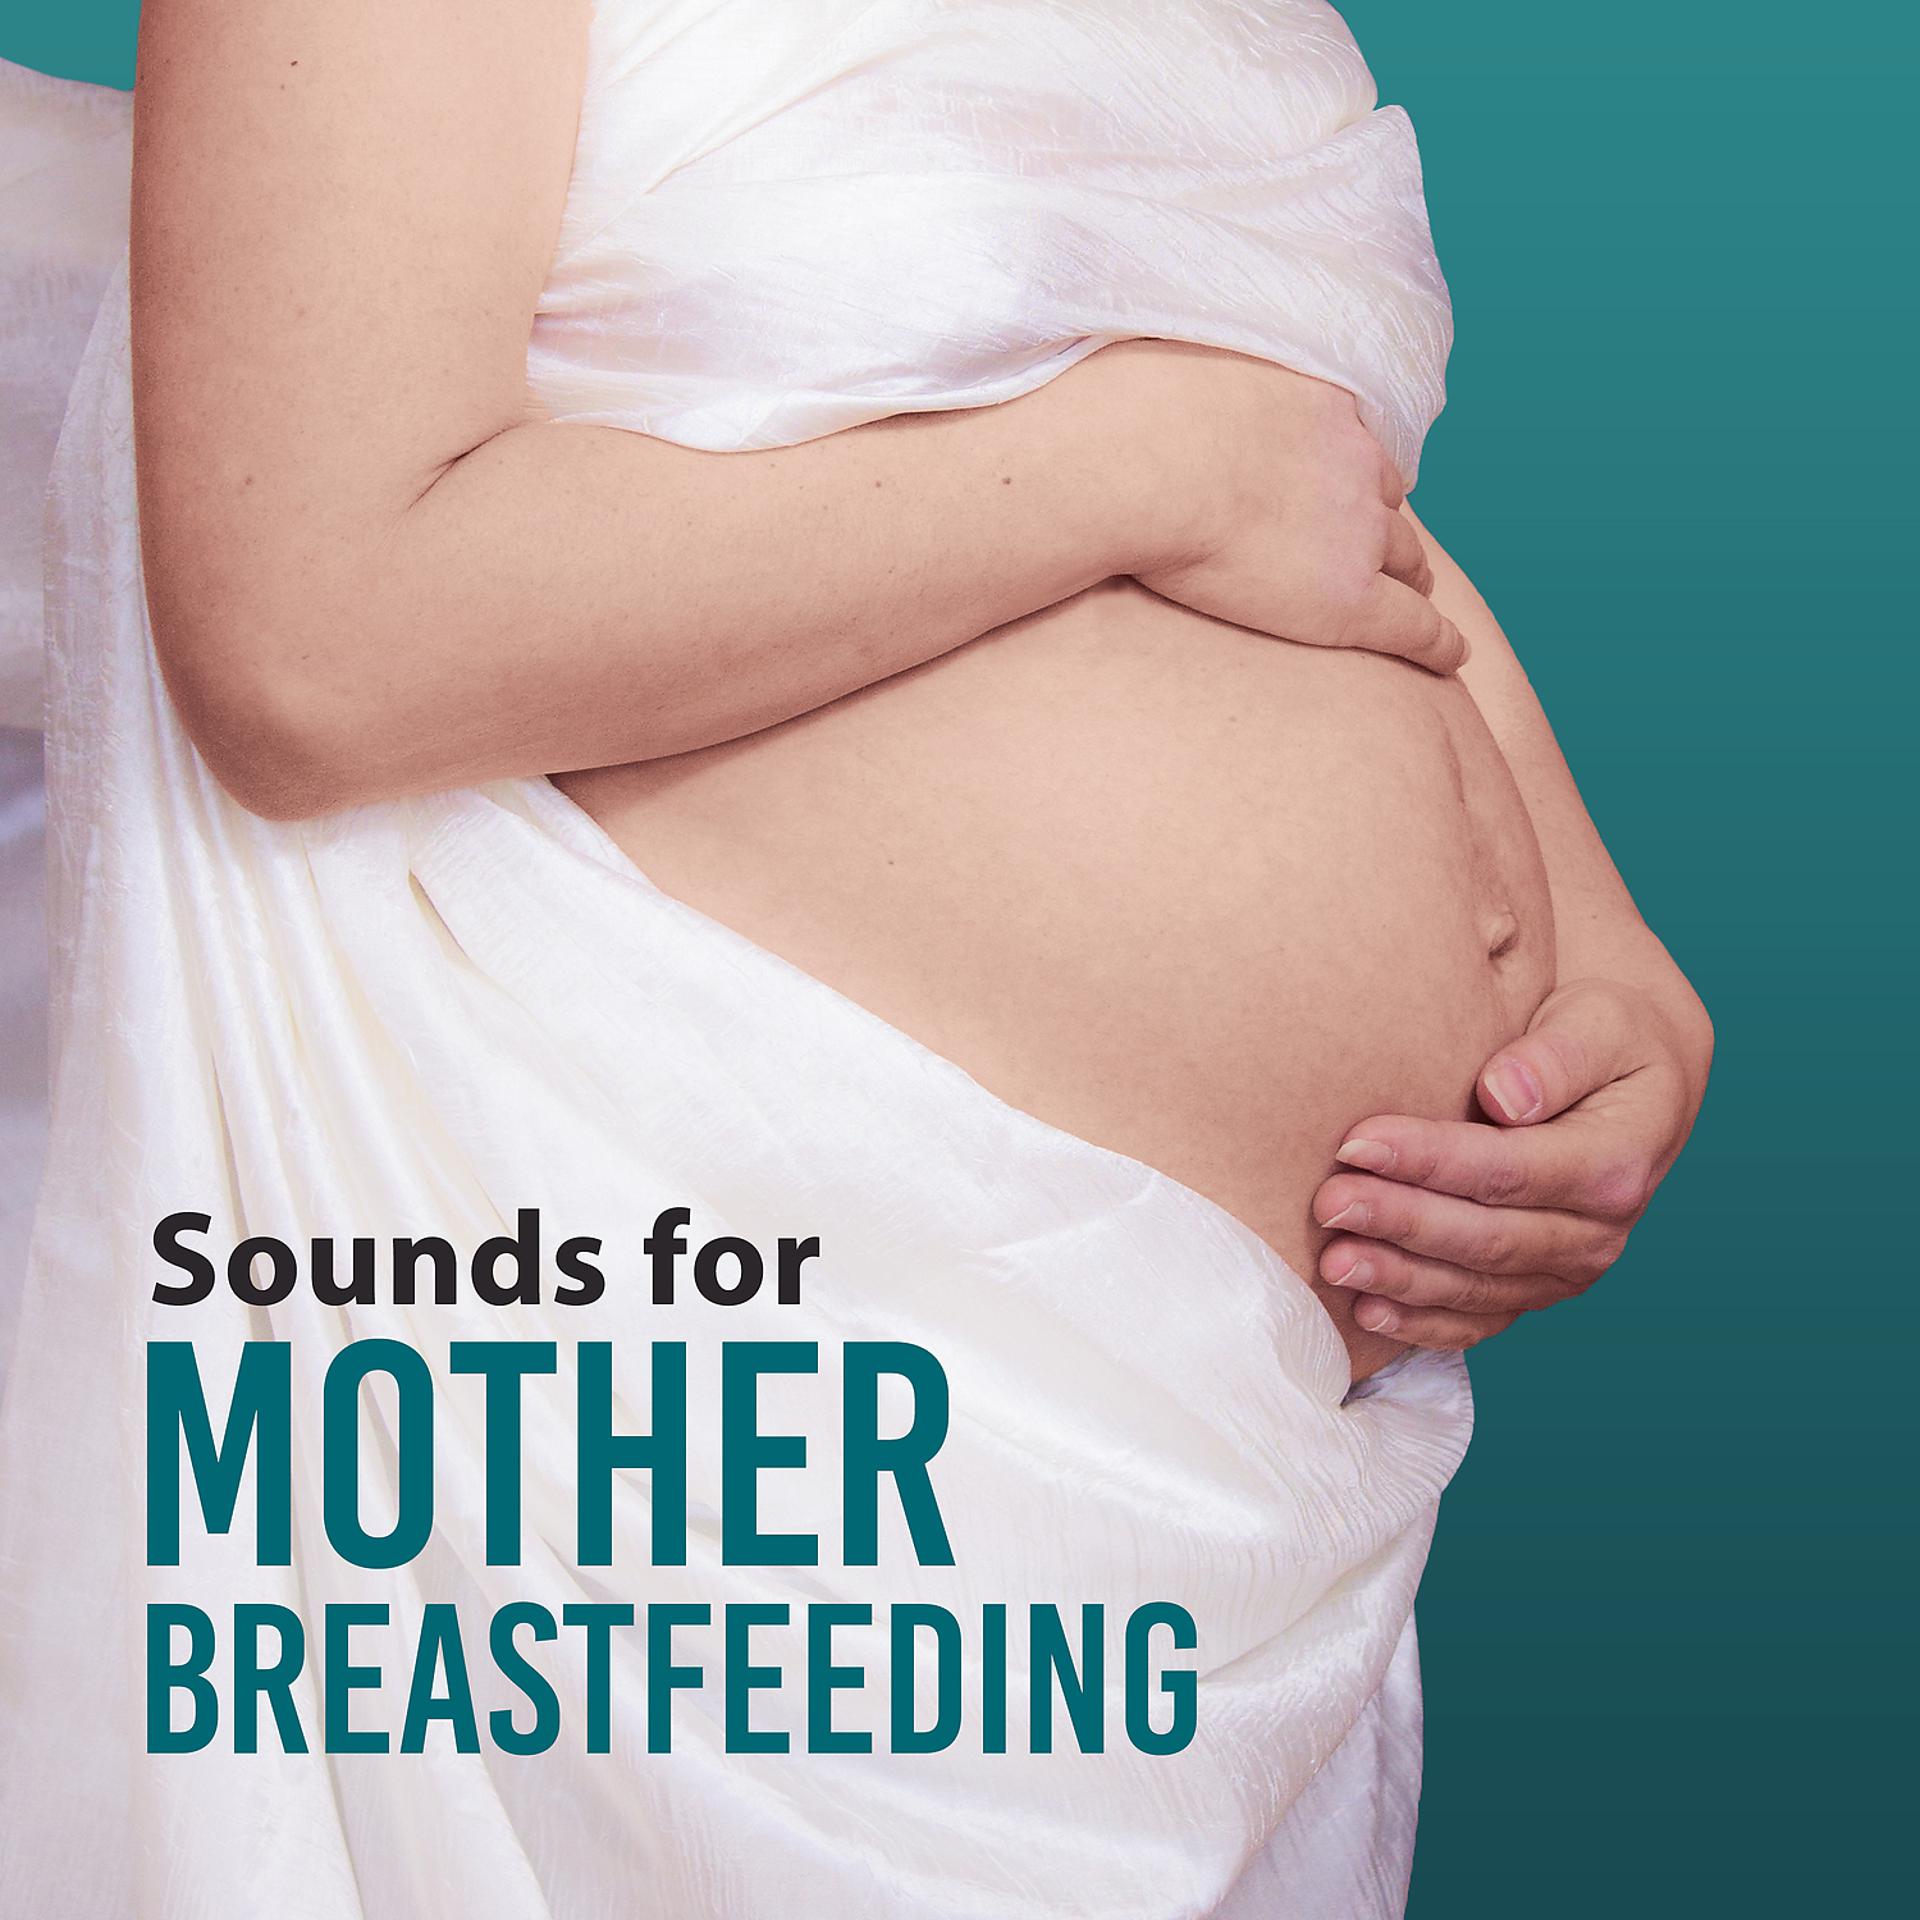 Постер альбома Sounds for Mother Breastfeeding - Sedation for Children, Feeding Pacific Time, Time for Breath, Little Sleep, Quiet Child is a Treasure, Mother's Smile is Priceless